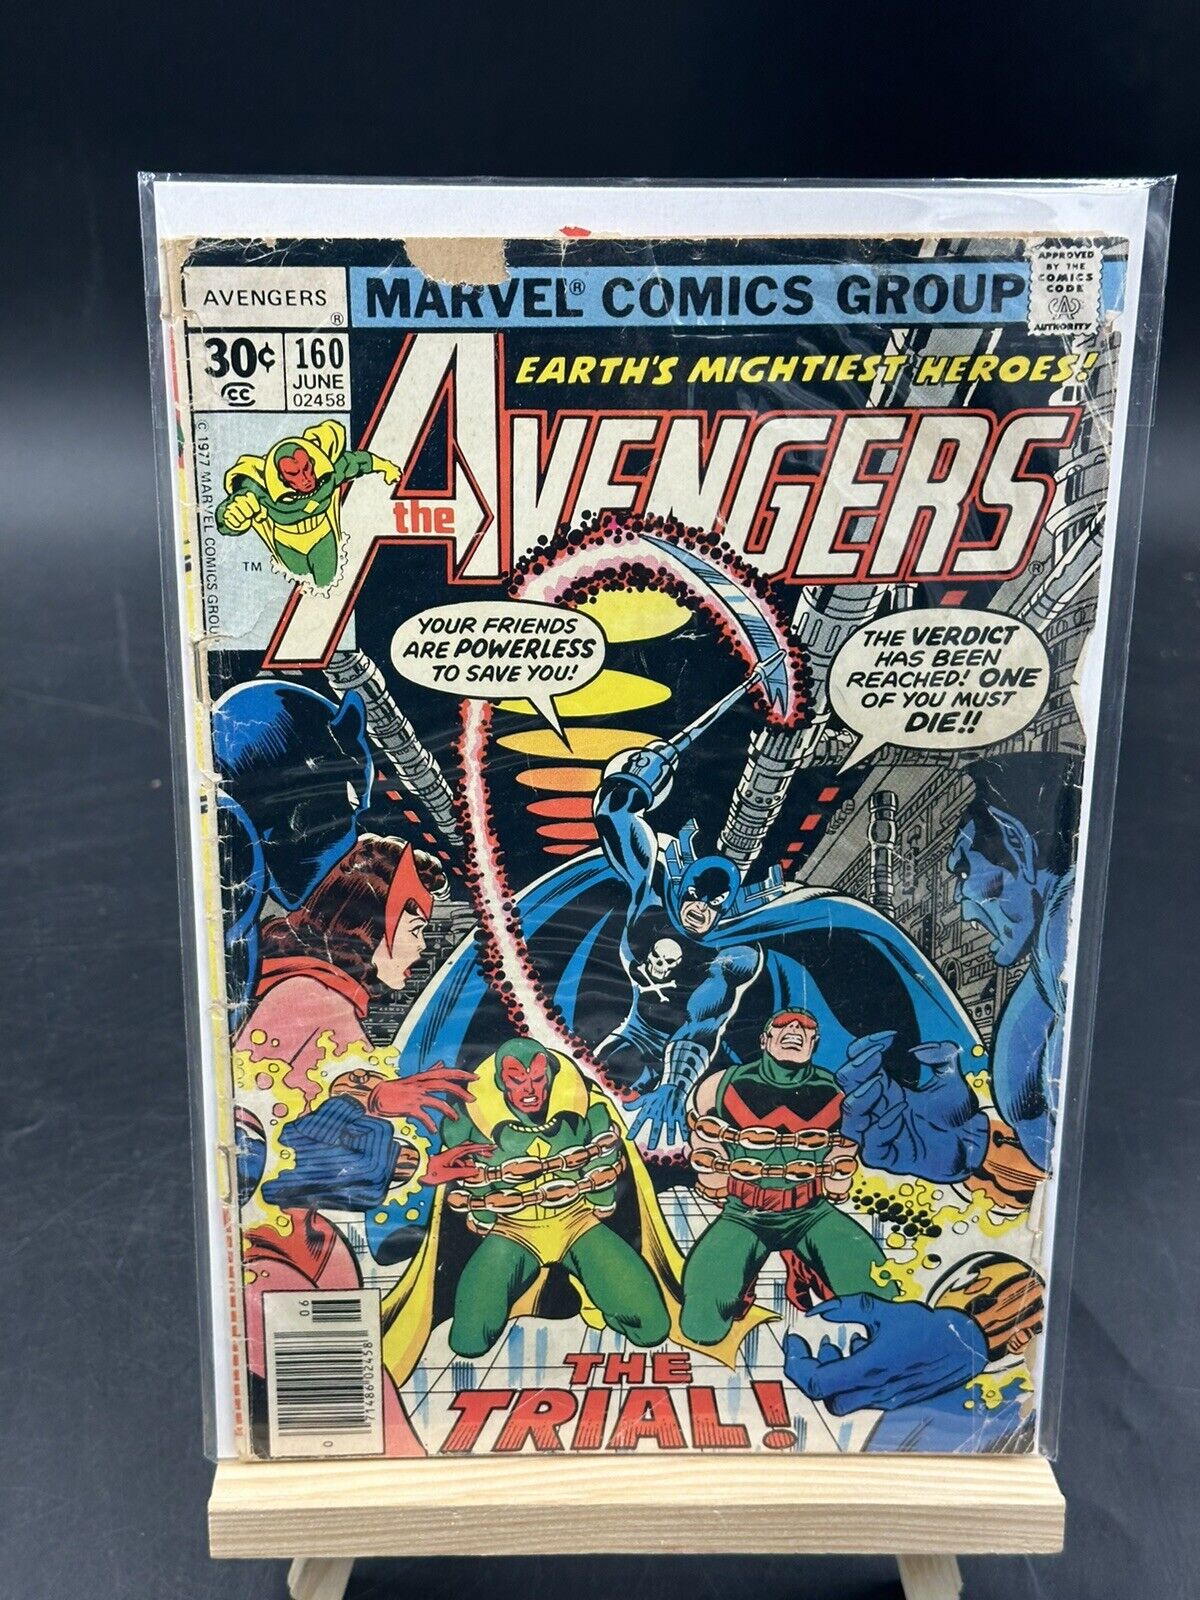 The Avengers #160 Jun 1977, Marvel Comic Book bad condition